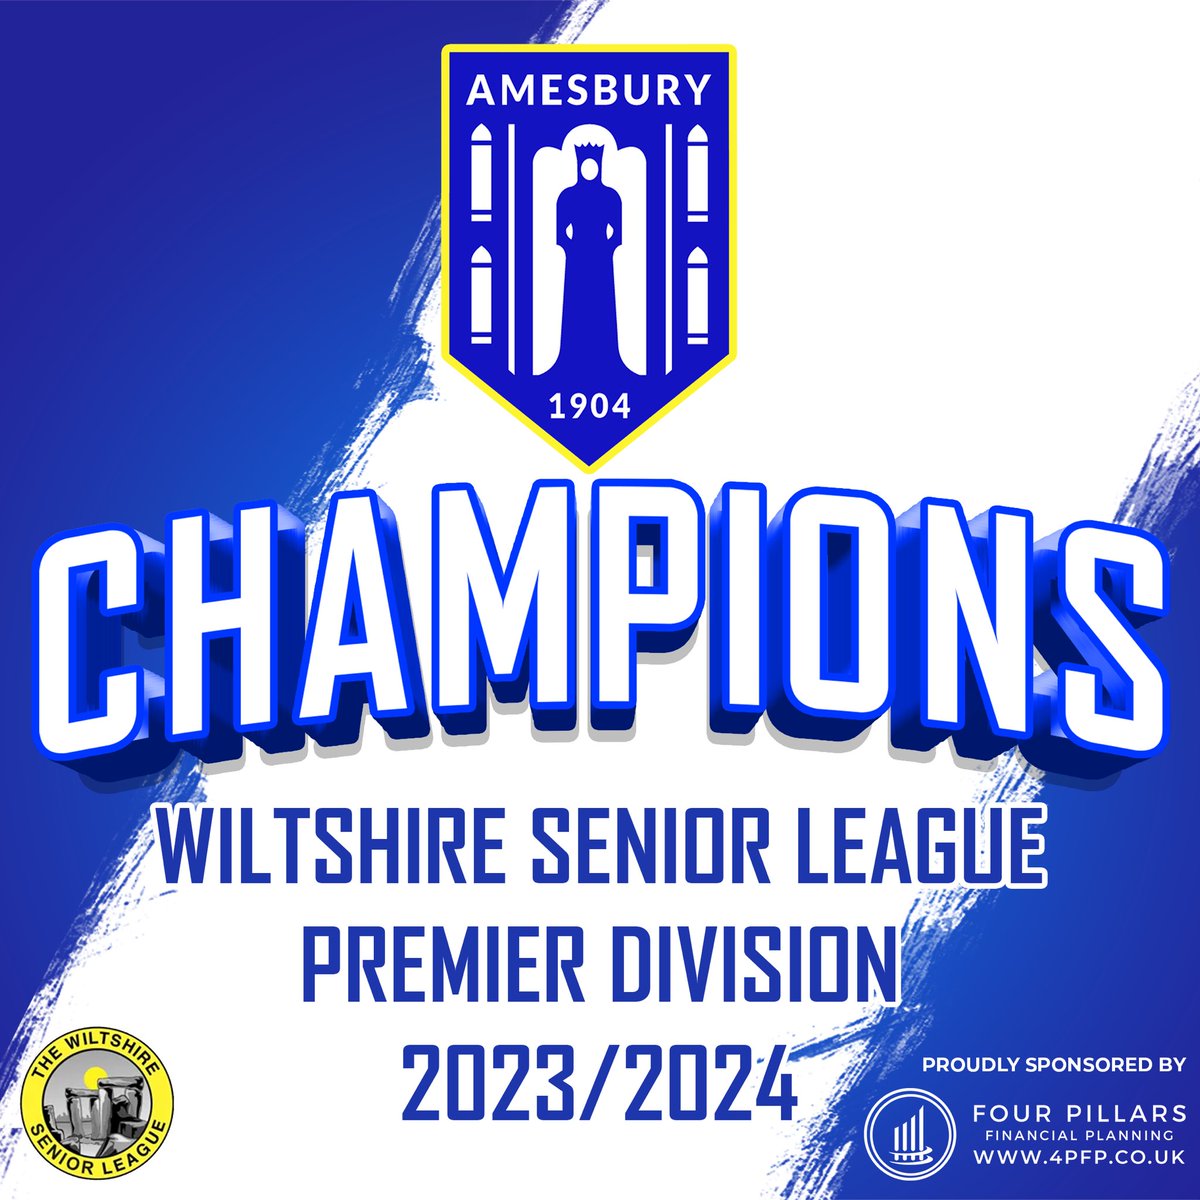 𝗖𝗛𝗔𝗠𝗣𝗜𝗢𝗡𝗦 With other results tonight going our way we have been have crowned @WiltsLeague premier division winners 🏆 💙🤍